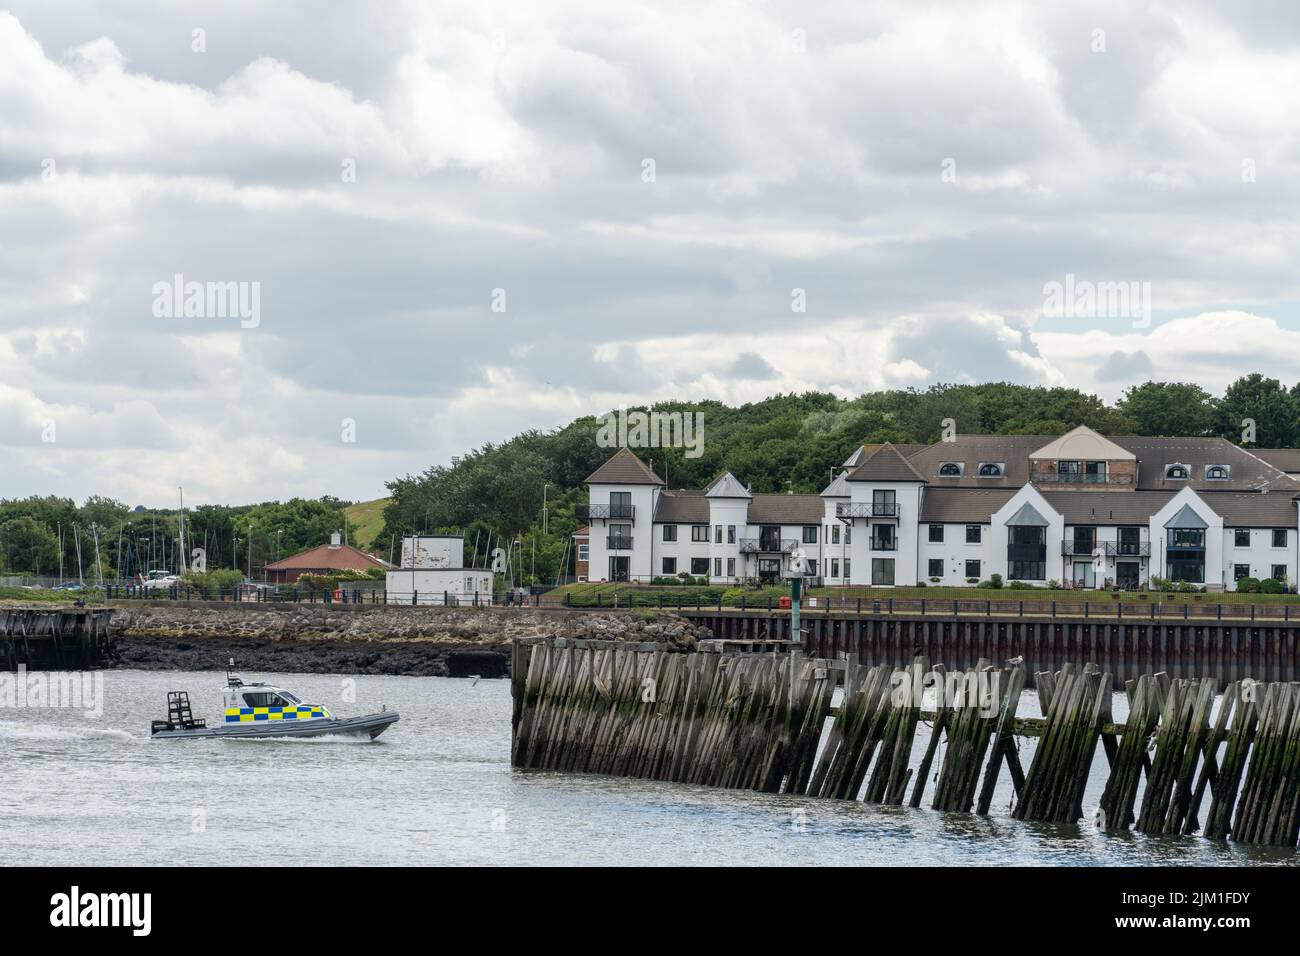 A riverscape view over the River Tyne to waterfront housing in South Shields, South Tyneside, UK, with the river police boat. Stock Photo